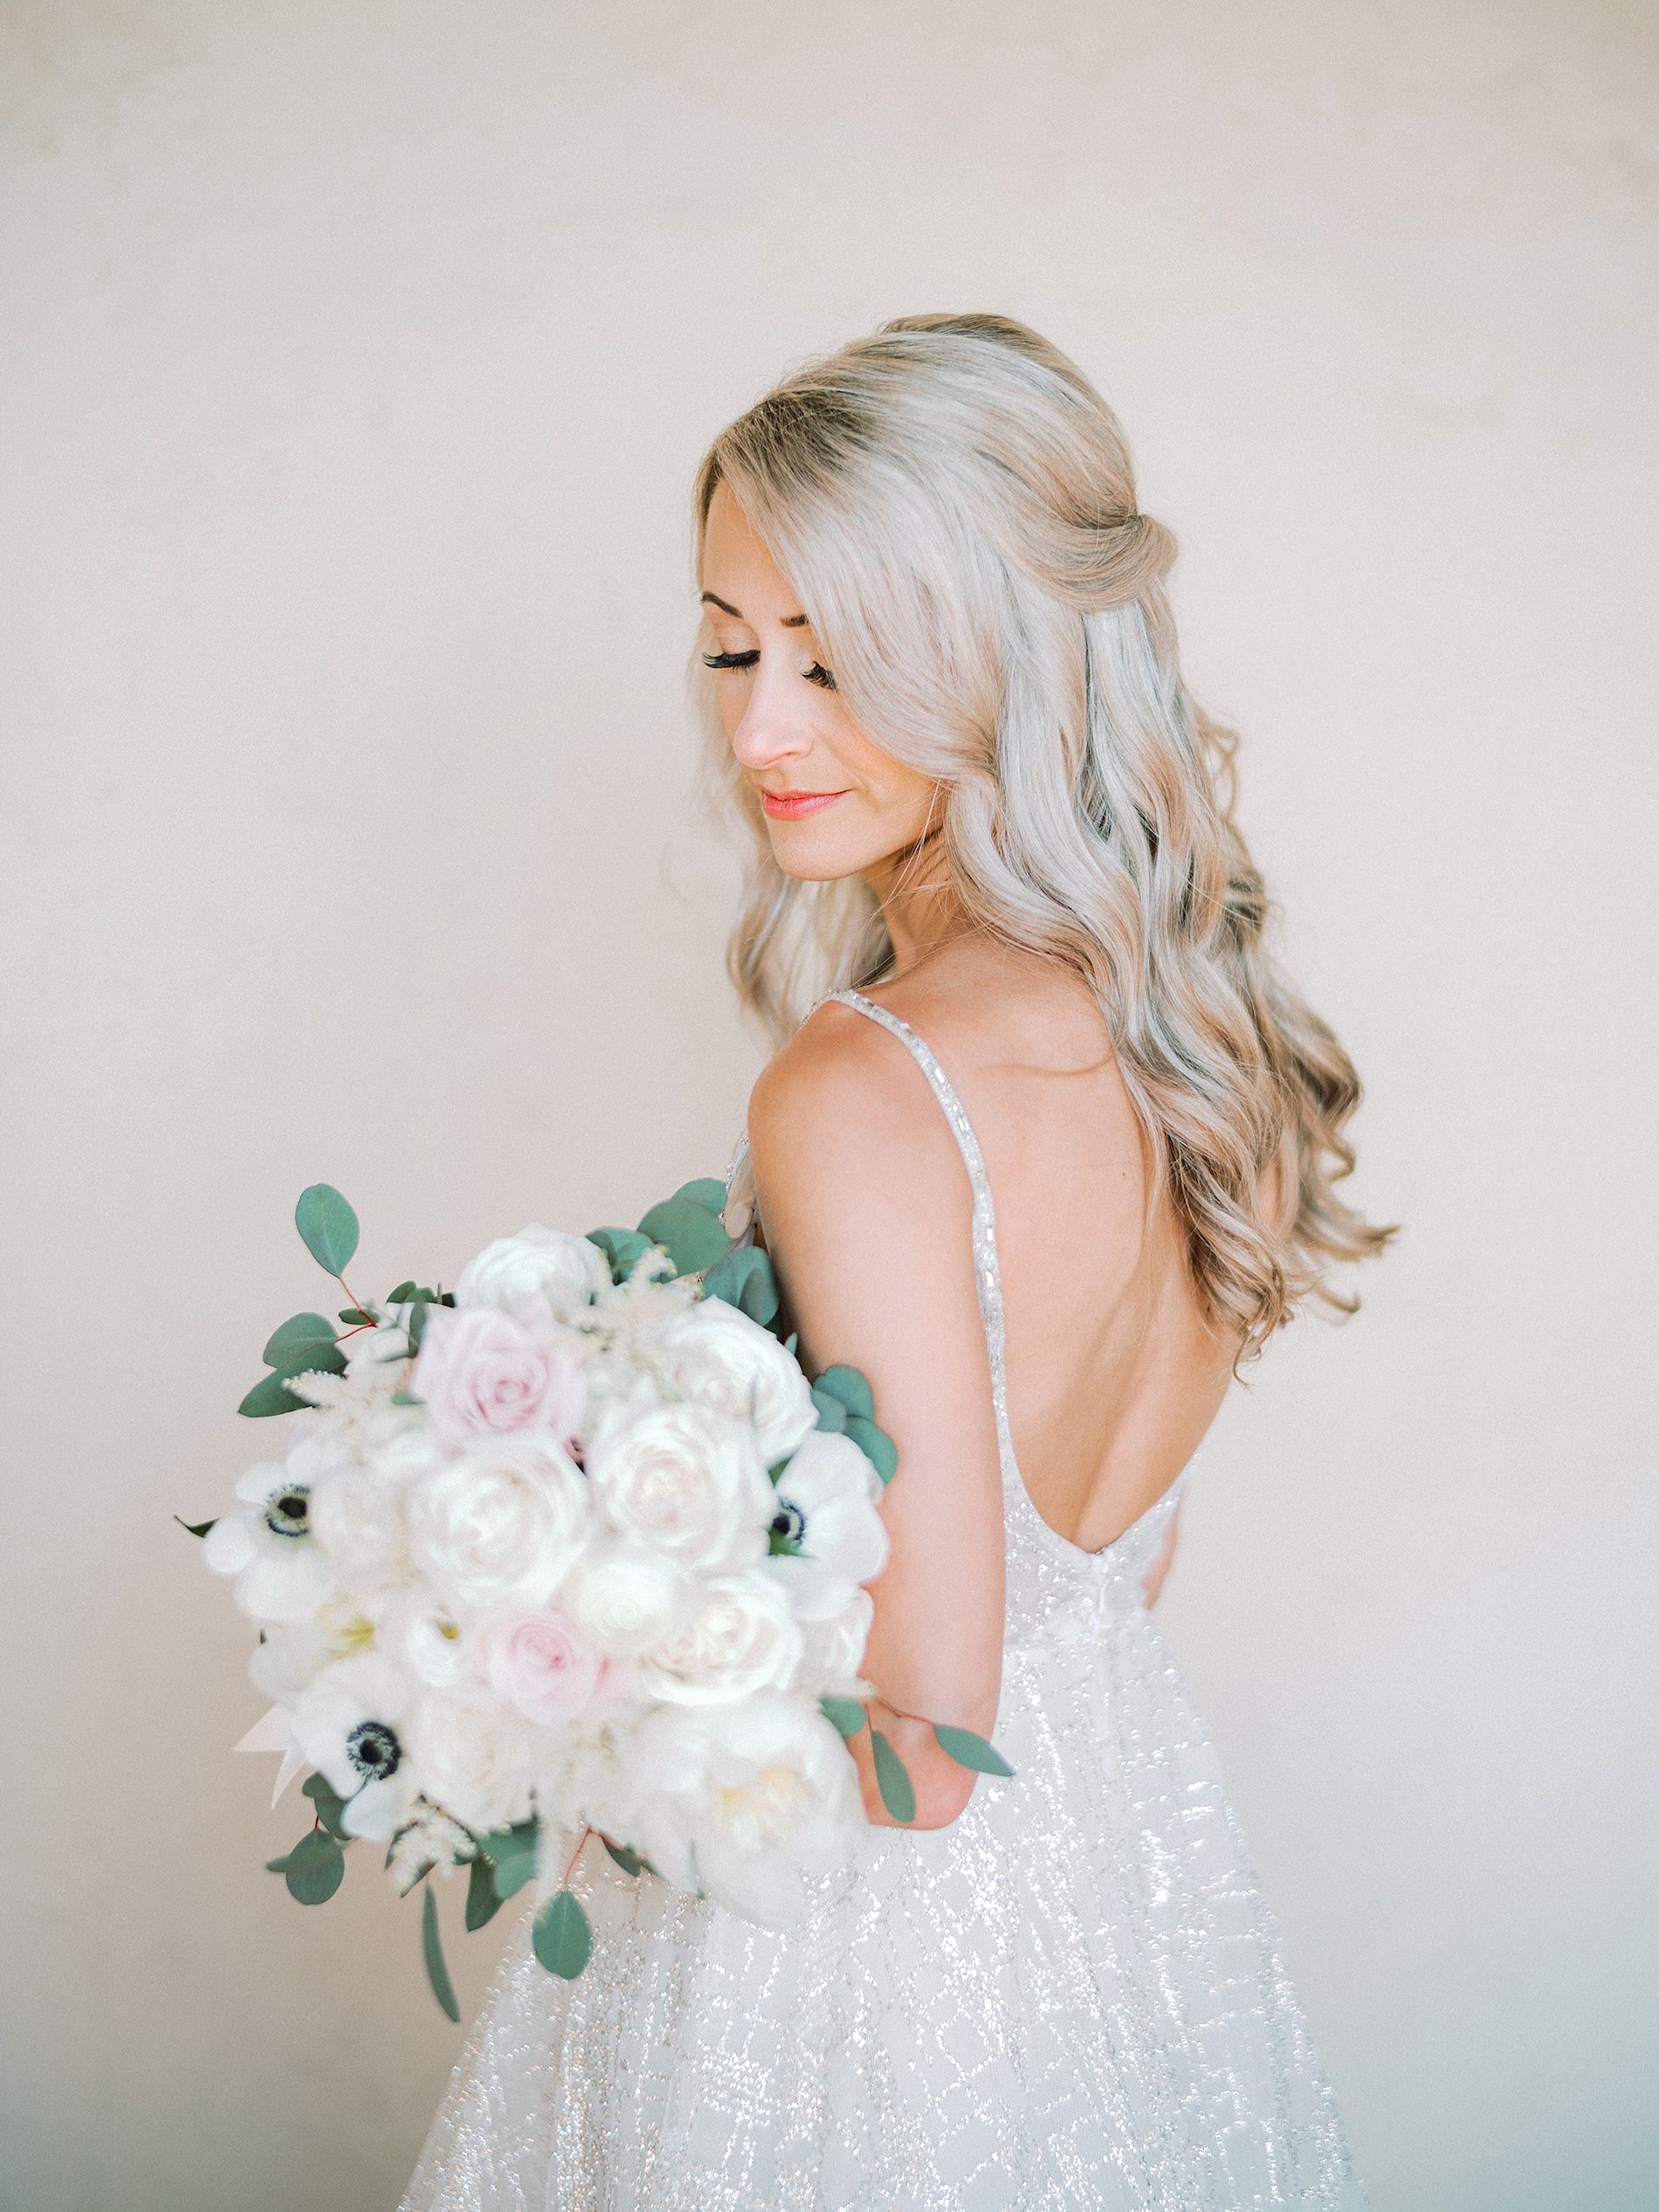 Tampa Bay Bride Beauty Portrait, Half Up Hairdo Holding Blush Pink and White Roses, Anemone and Greenery Floral Bouquet in Open Back Lazaro Wedding Dress